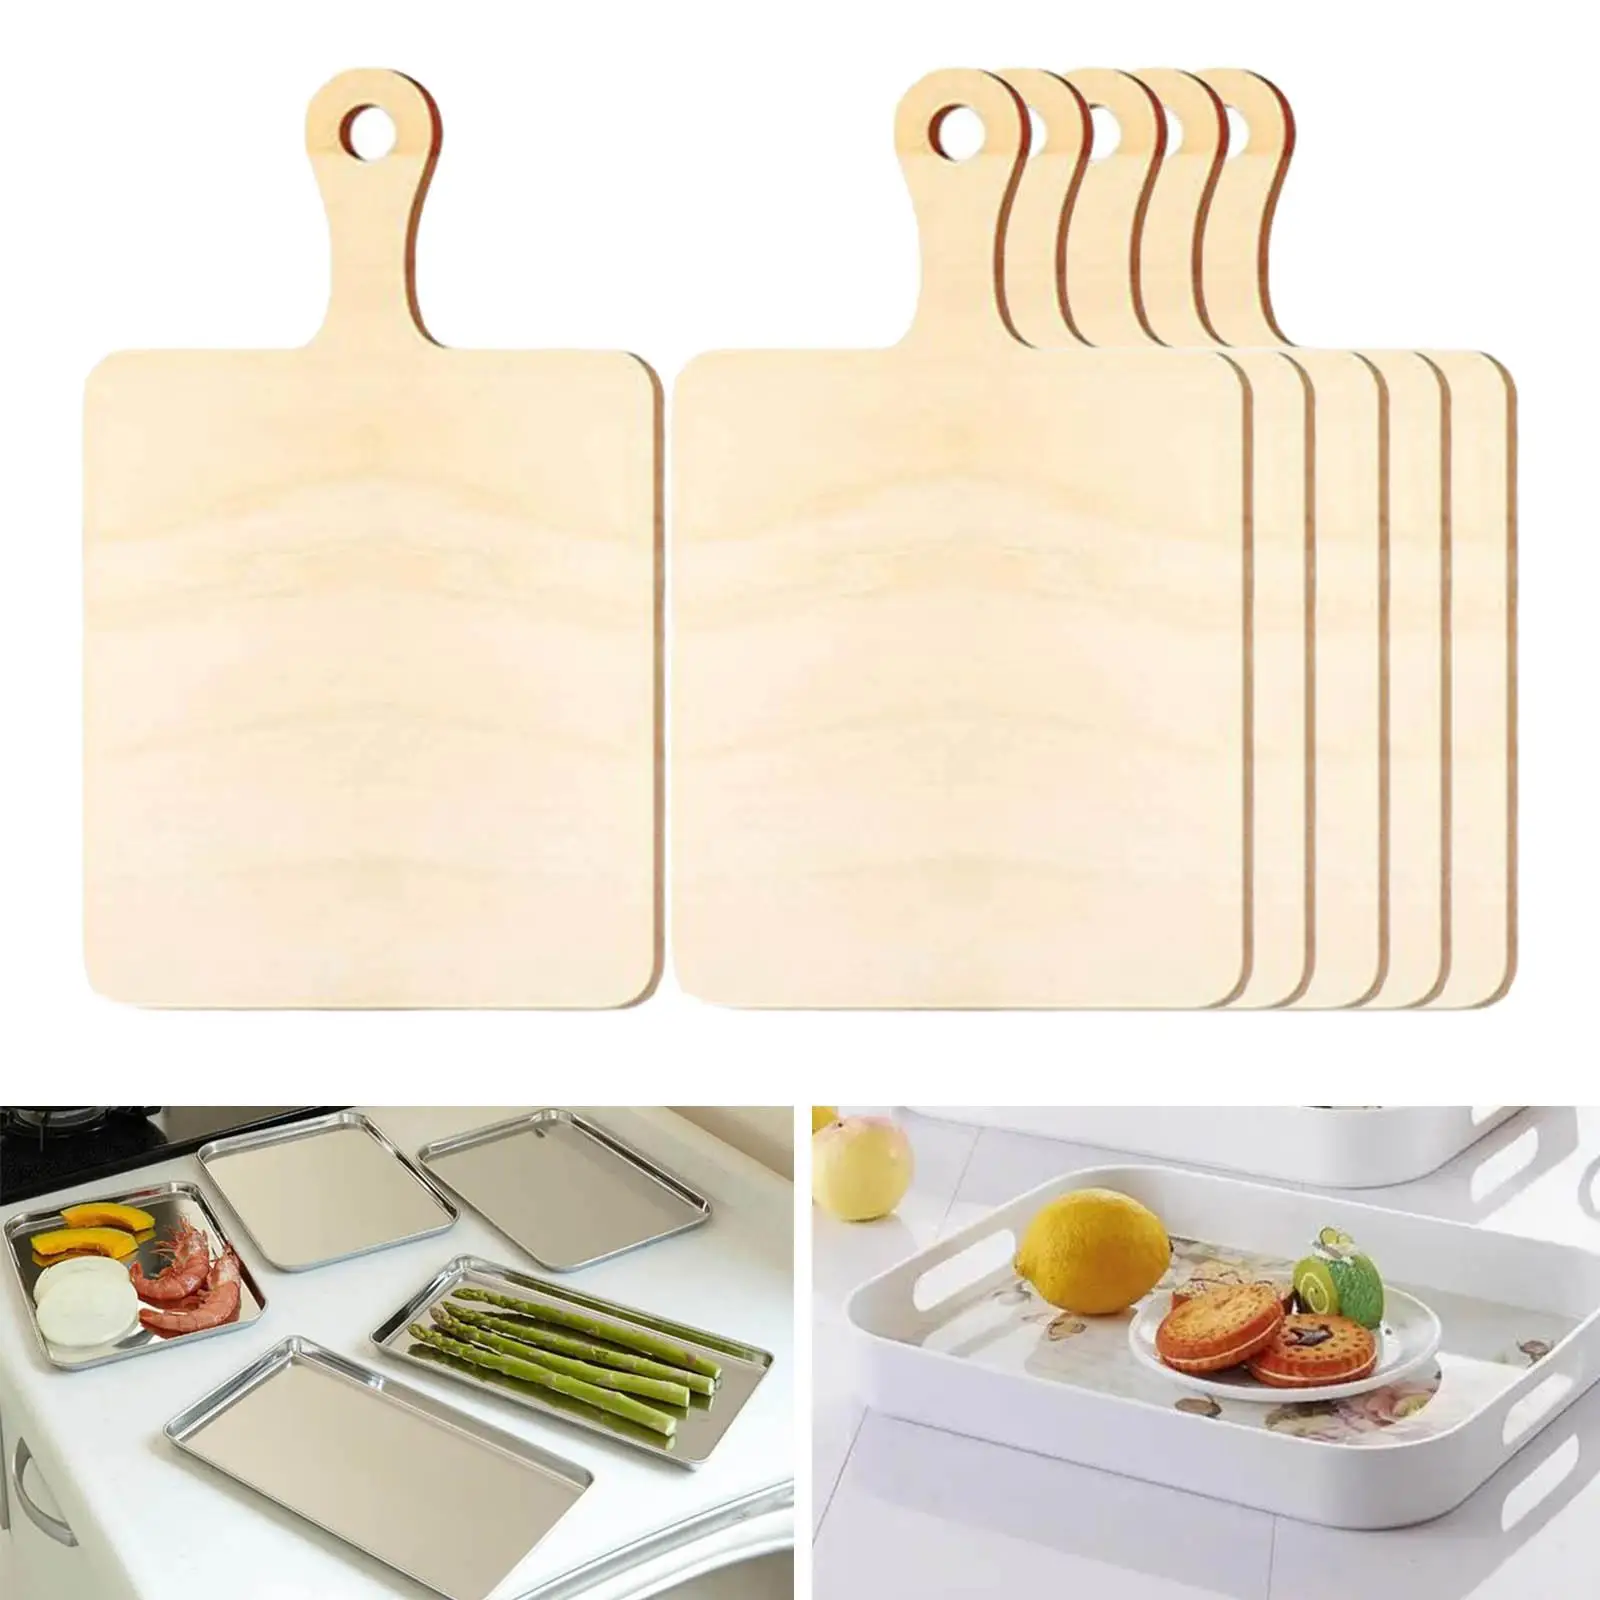 6x Small Cutting Board Chopping Board Set Vegetables Bread Board for Kitchen